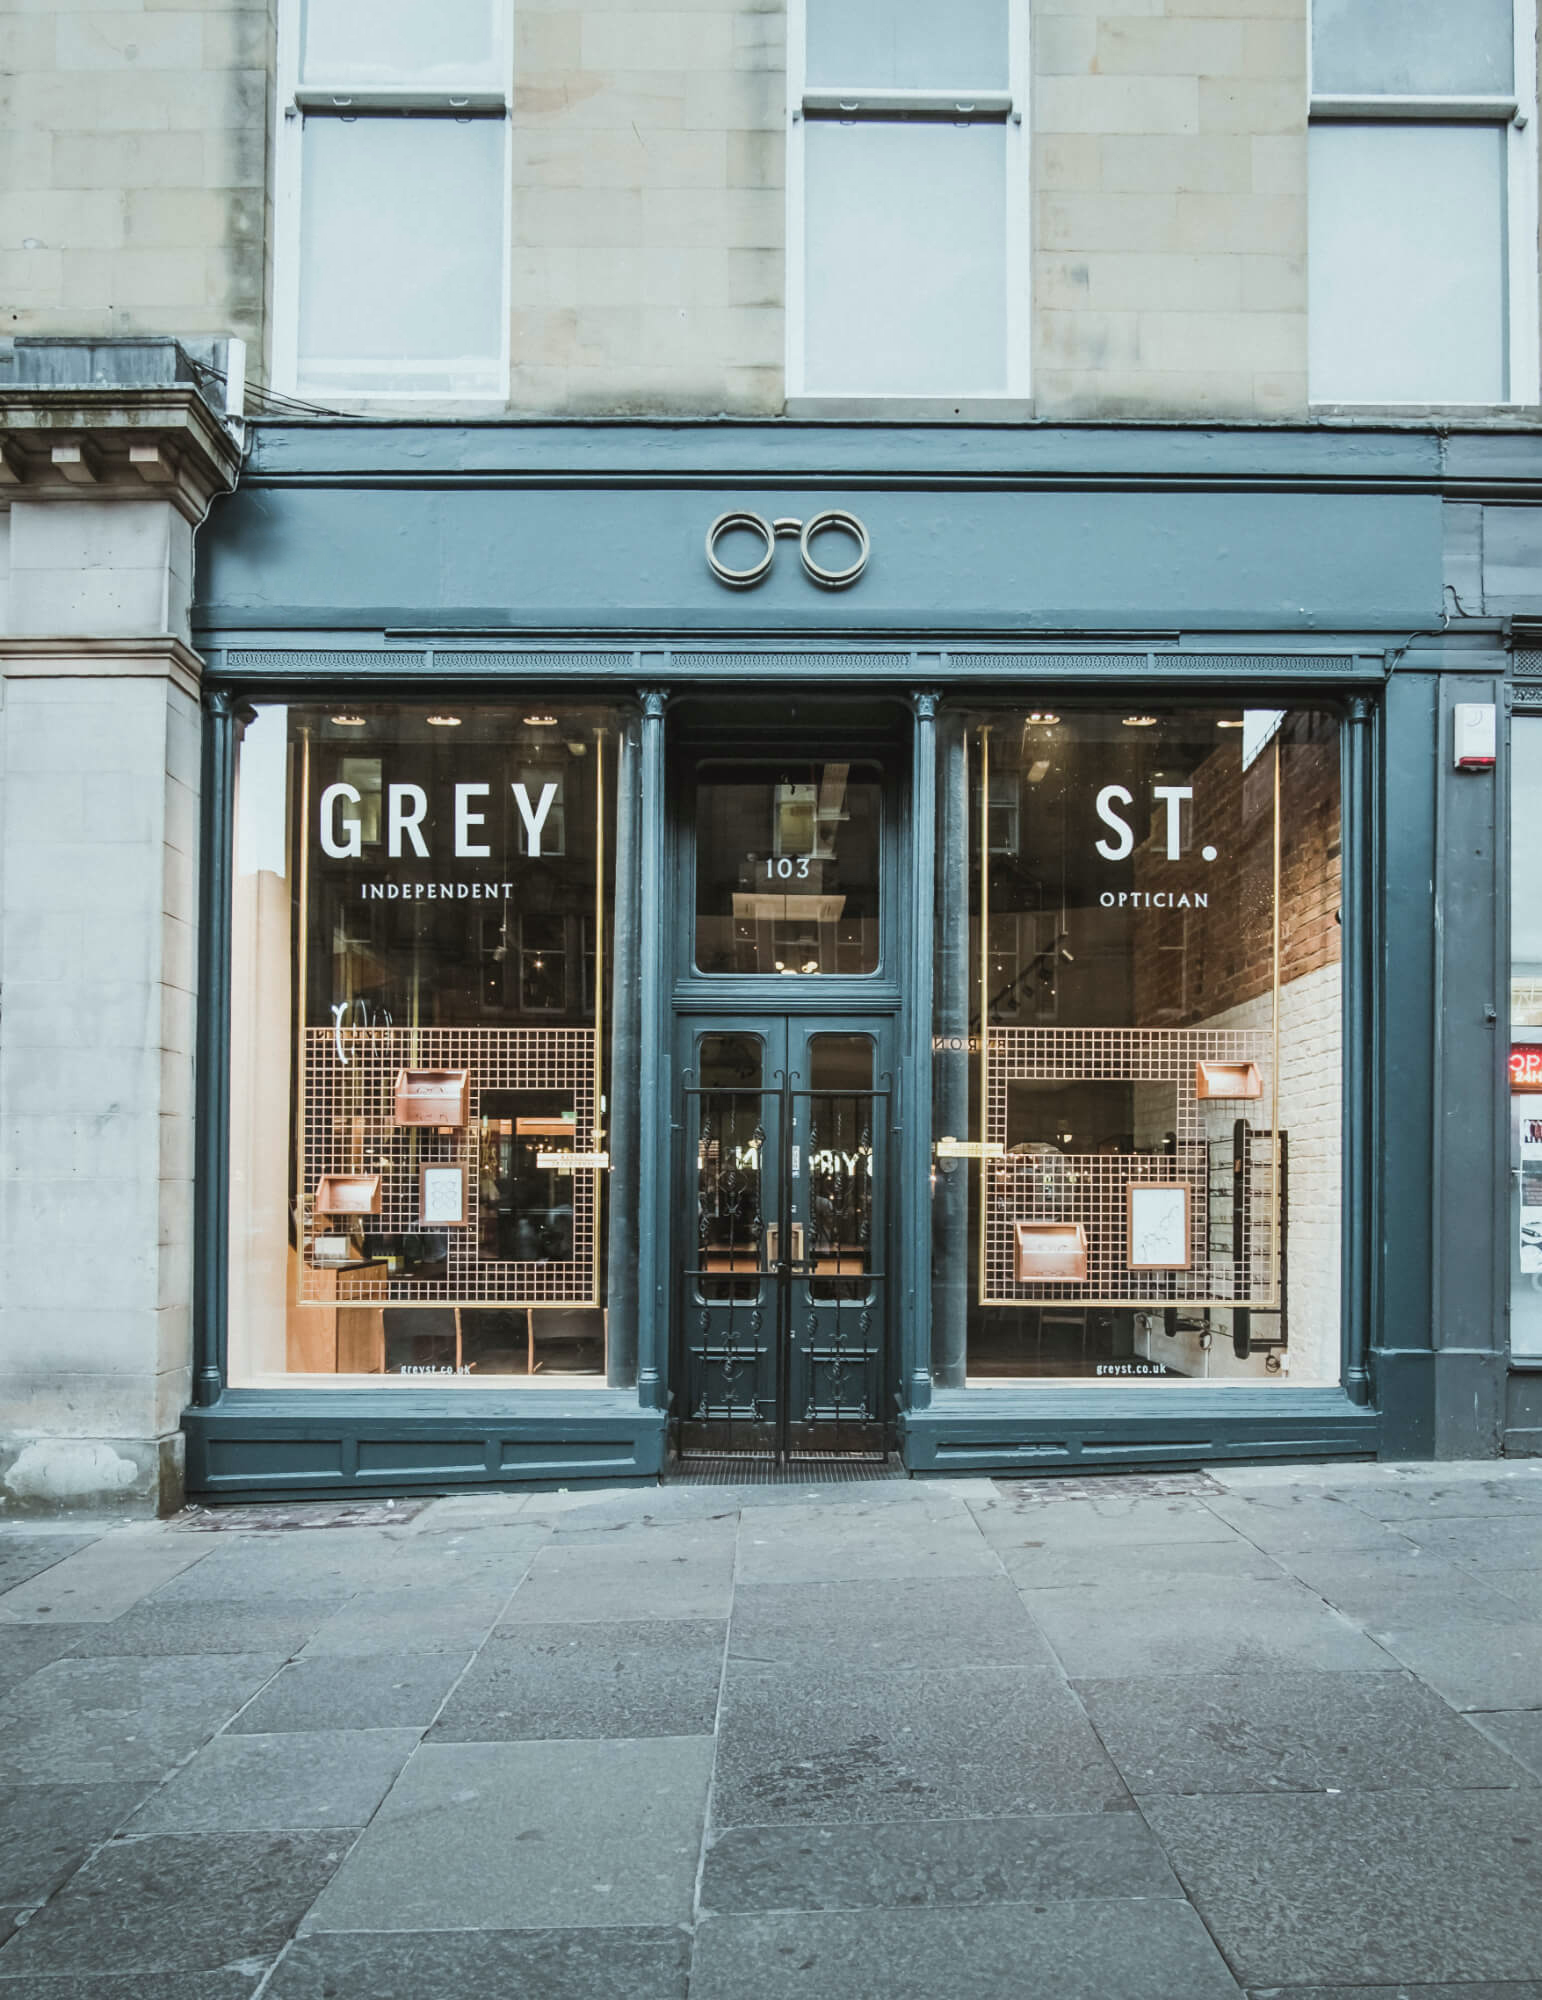 How to achieve a traditional shopfront design aesthetic